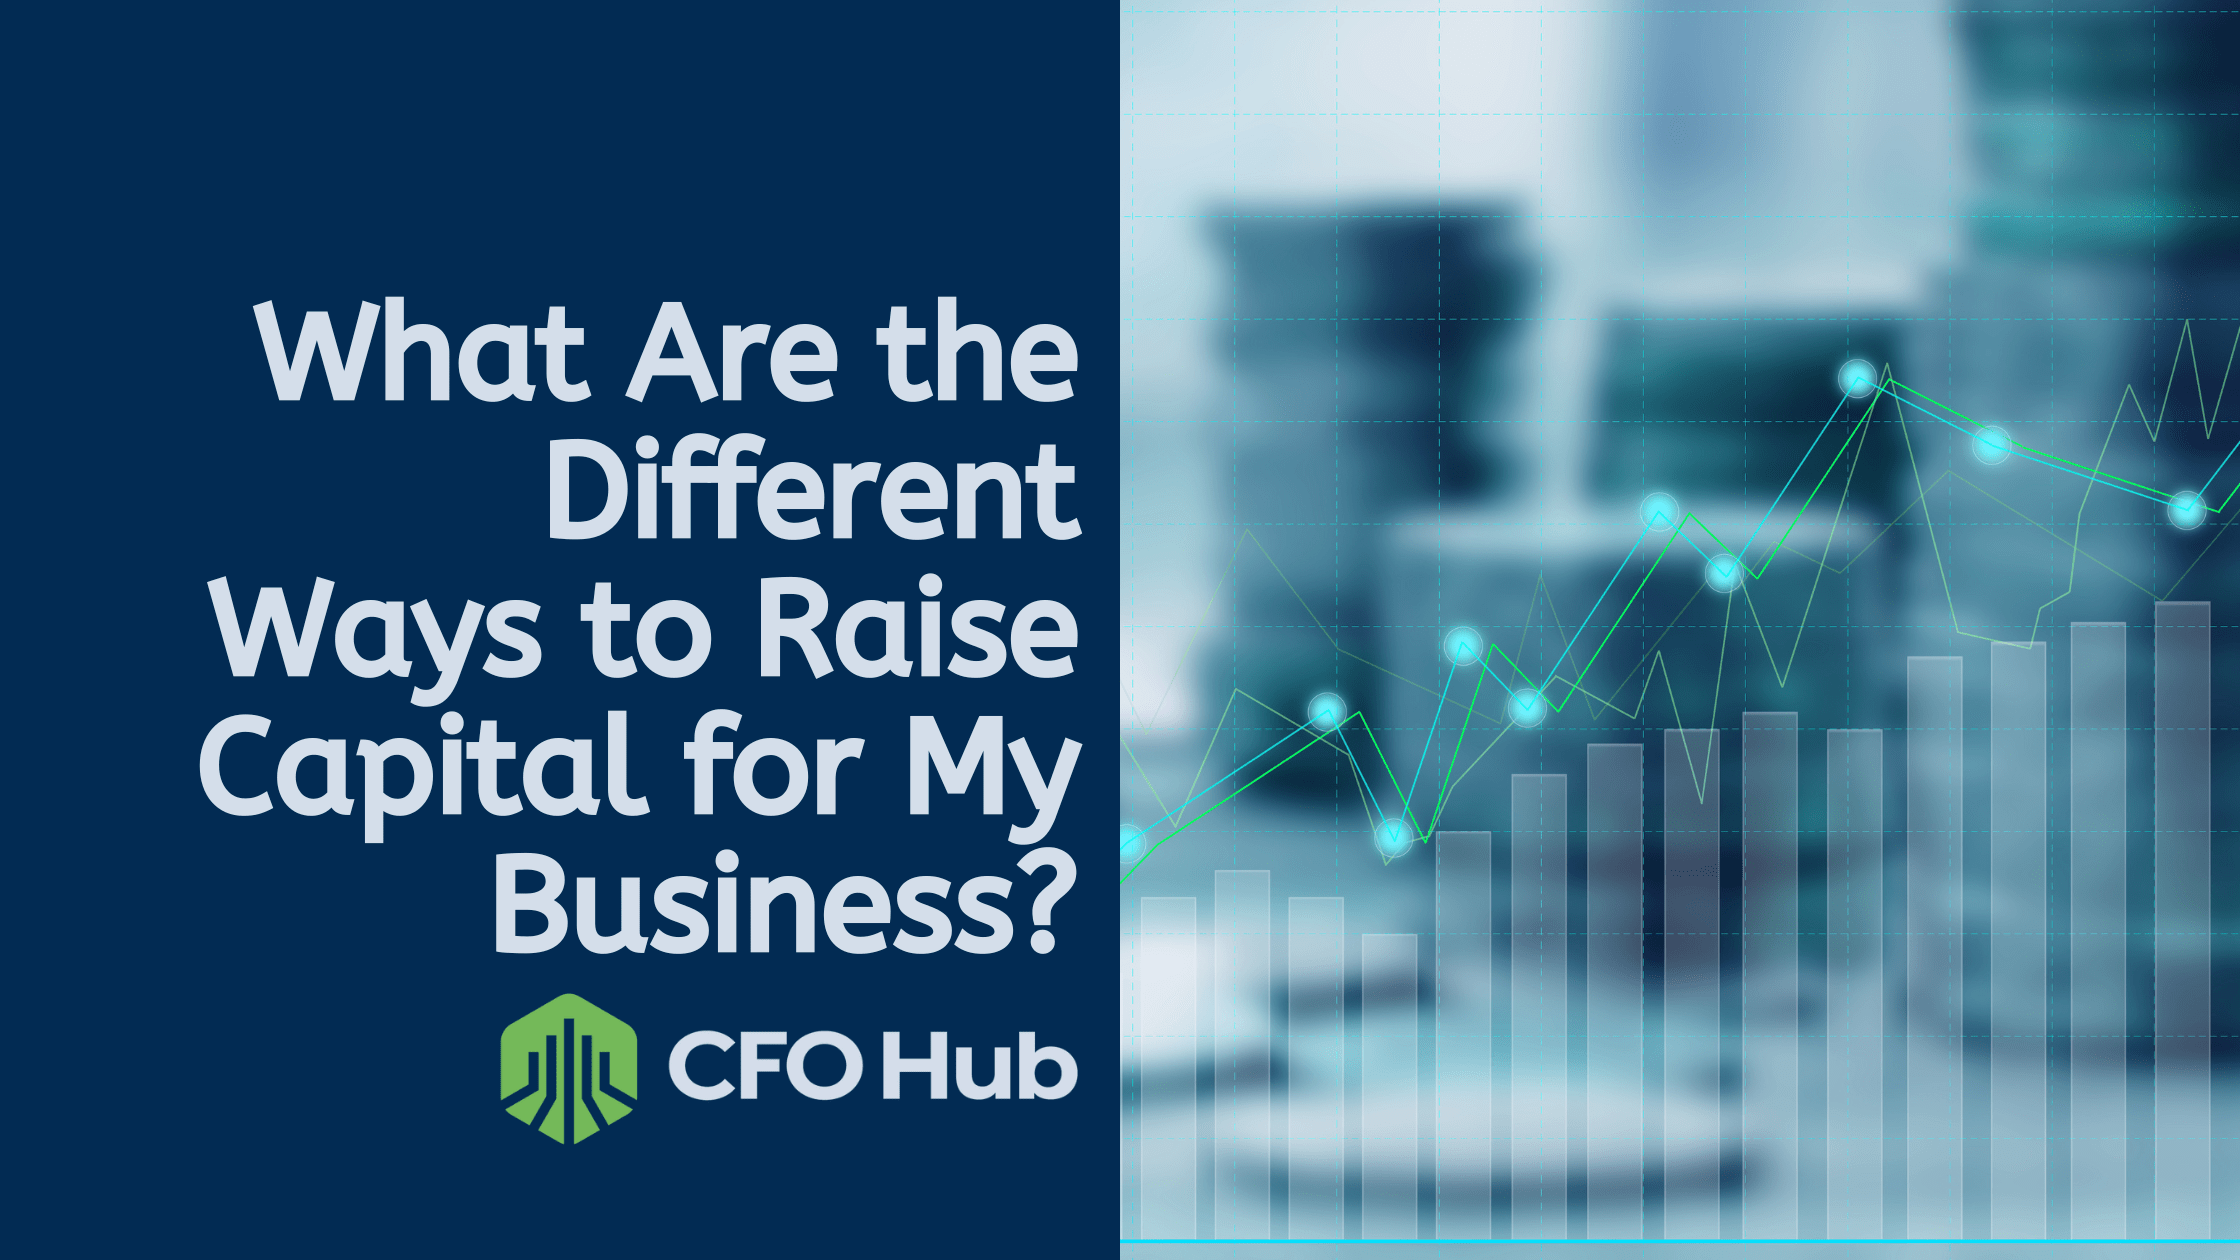 An image with a blurred background displays an upward graph and text that reads, "What Are the Different Ways to Raise Capital for My Business?" accompanied by the CFO Hub logo at the bottom left.